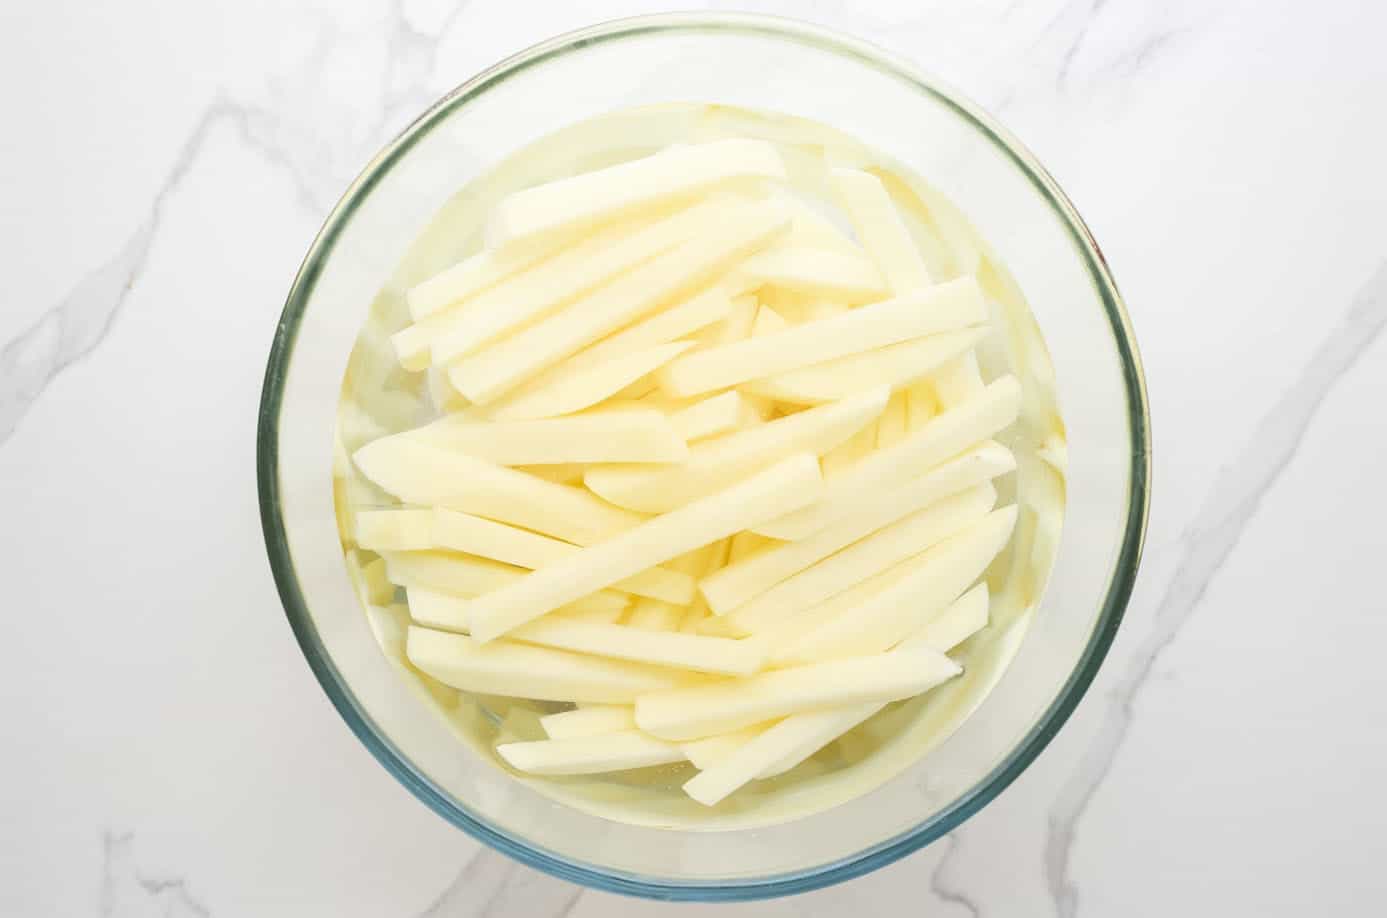 sliced potatoes for french fries in water.